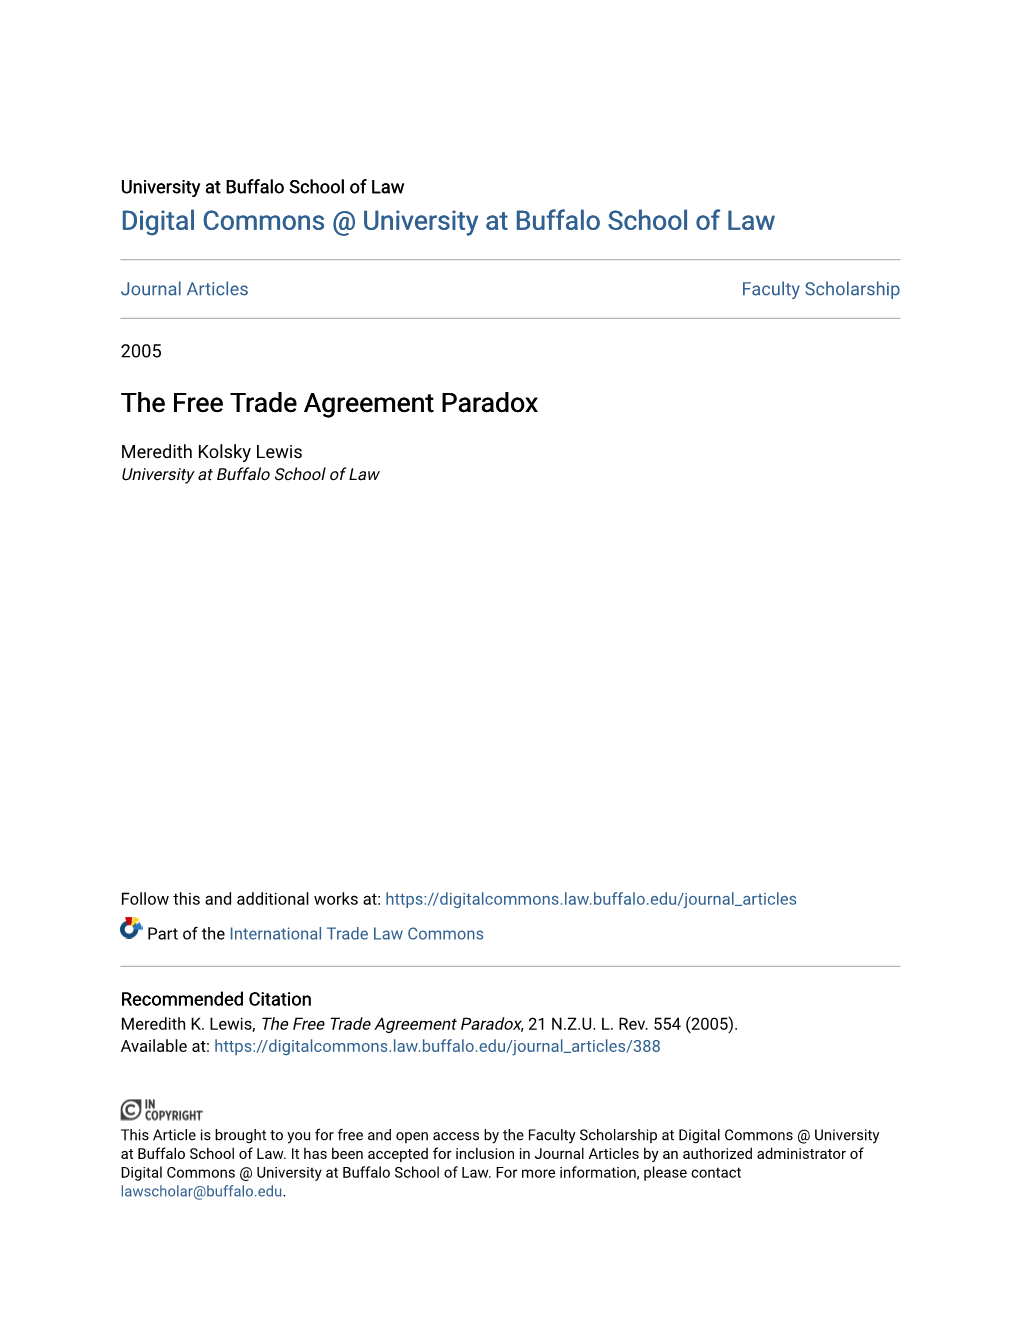 The Free Trade Agreement Paradox